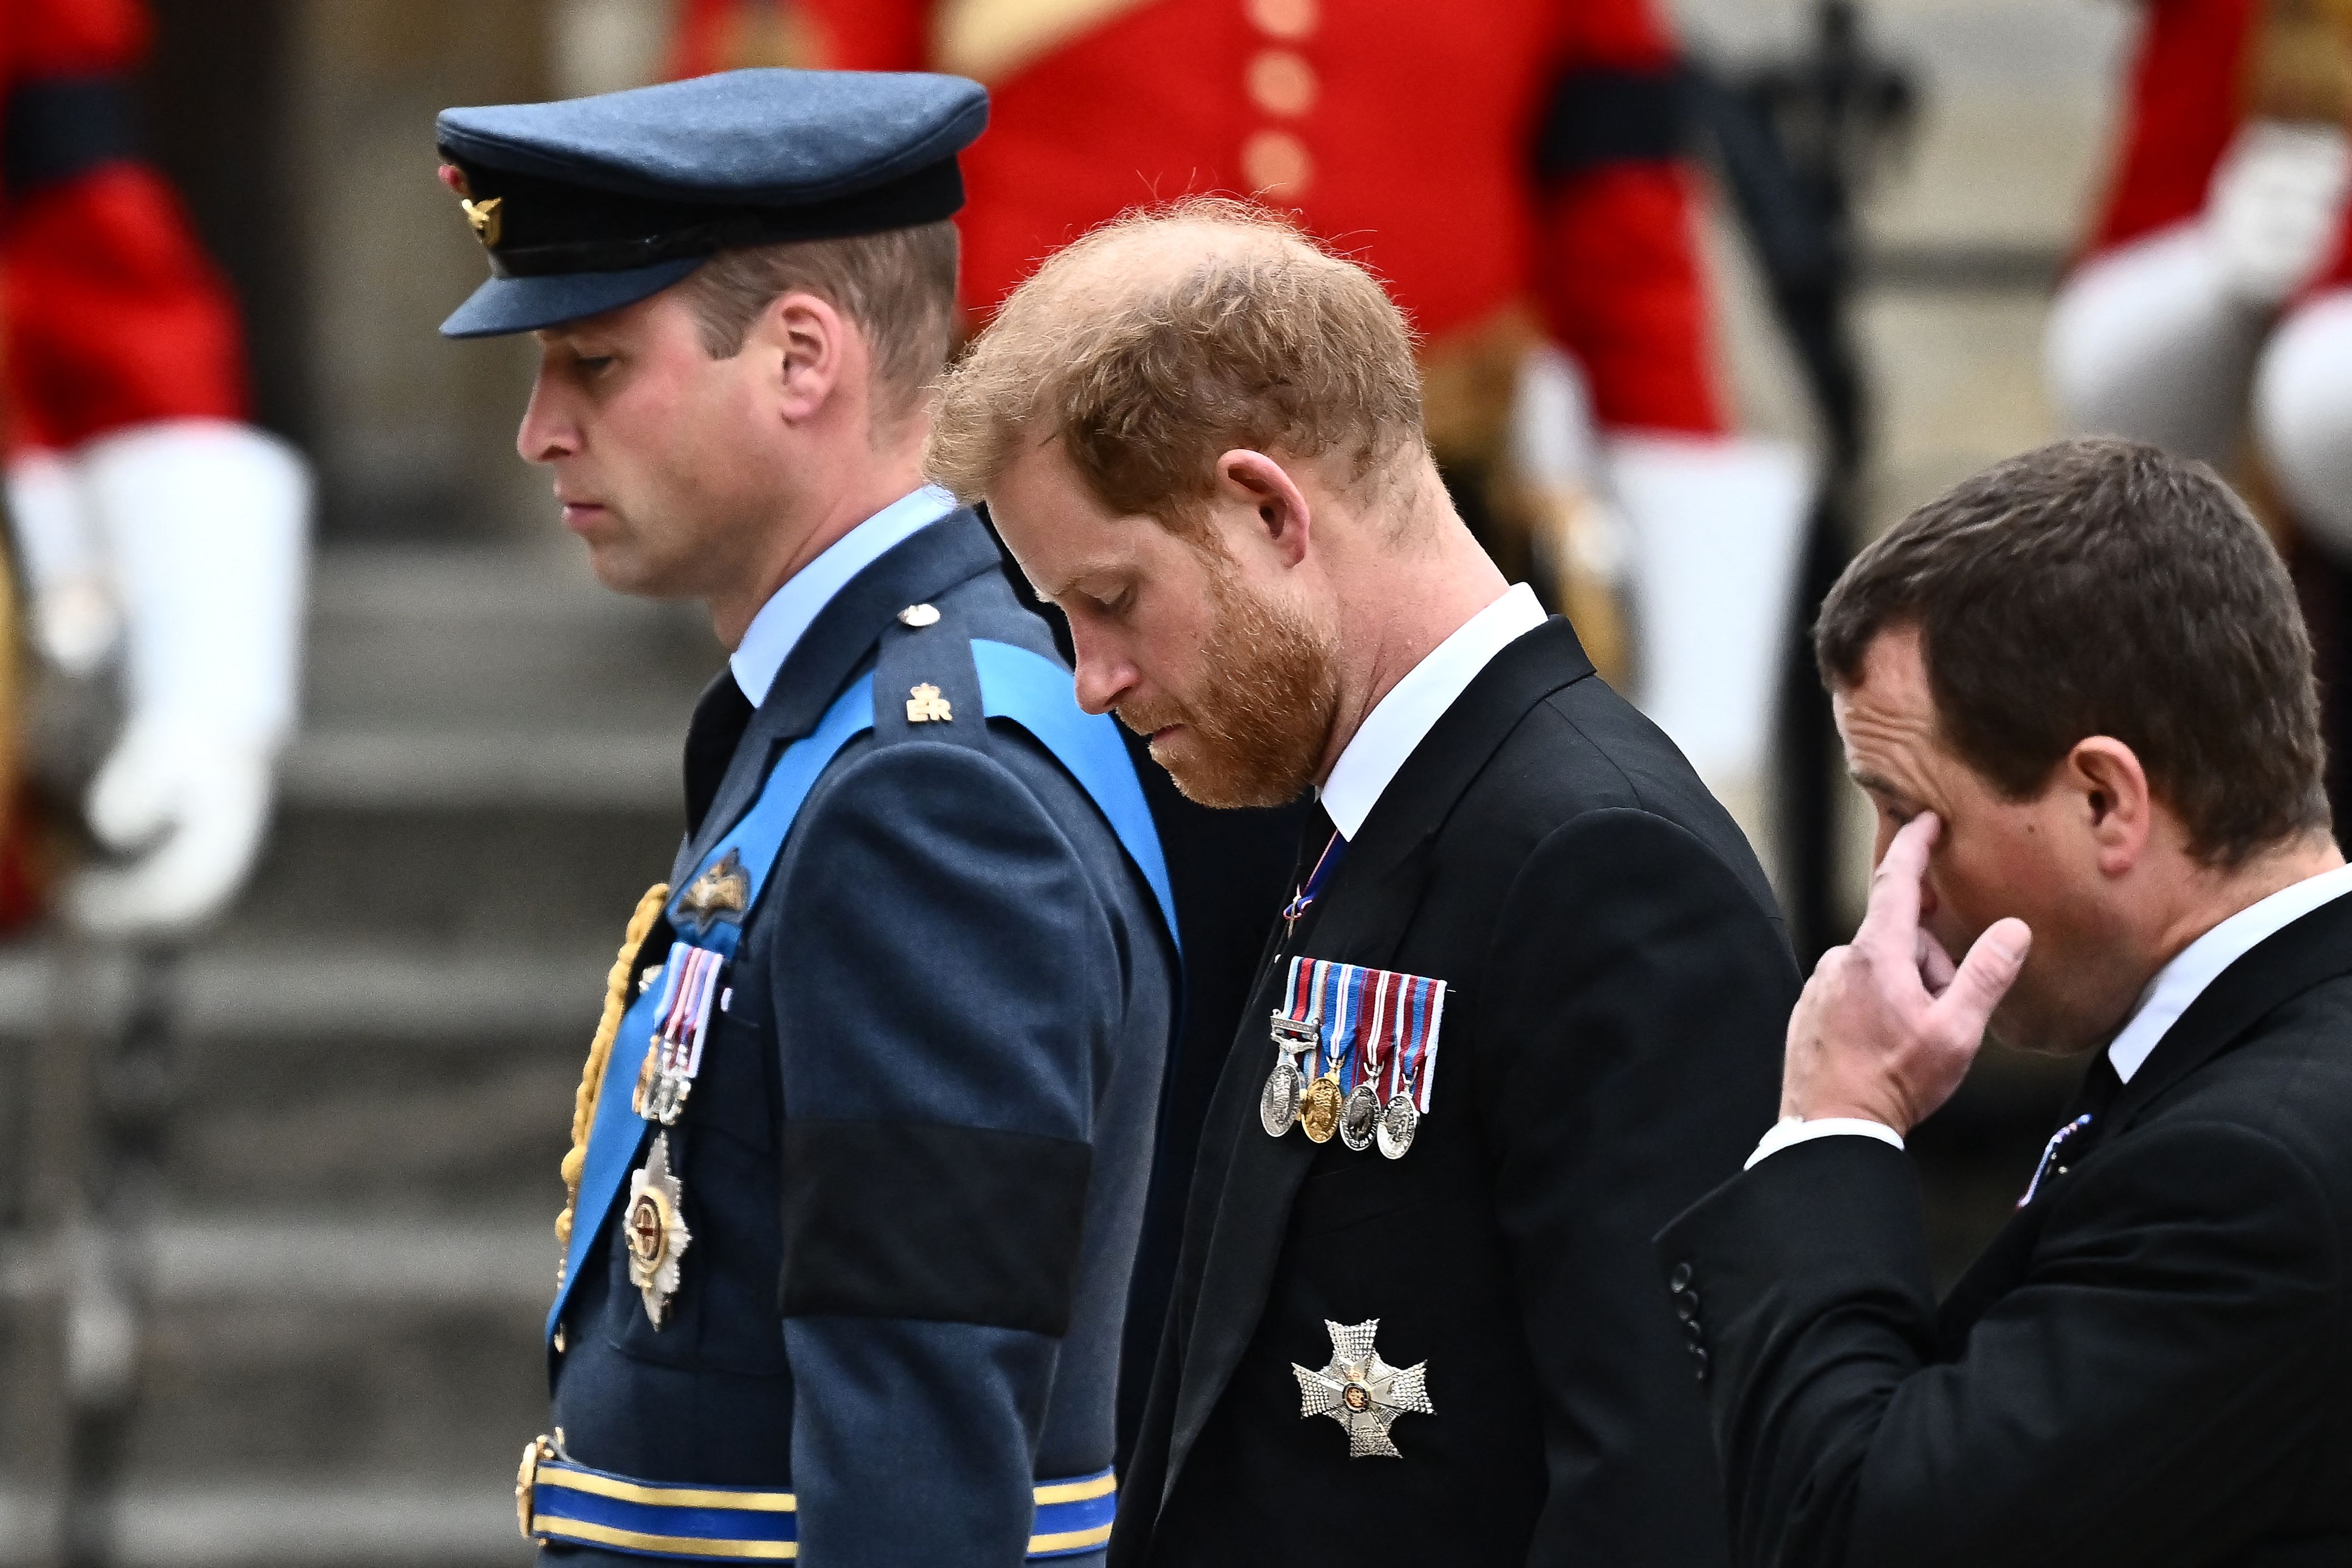 Britain's Prince William, Prince of Wales (L) and Britain's Prince Harry (C), Duke of Sussex arrive at Westminster Abbey in London on September 19, 2022 | Source: Getty Images